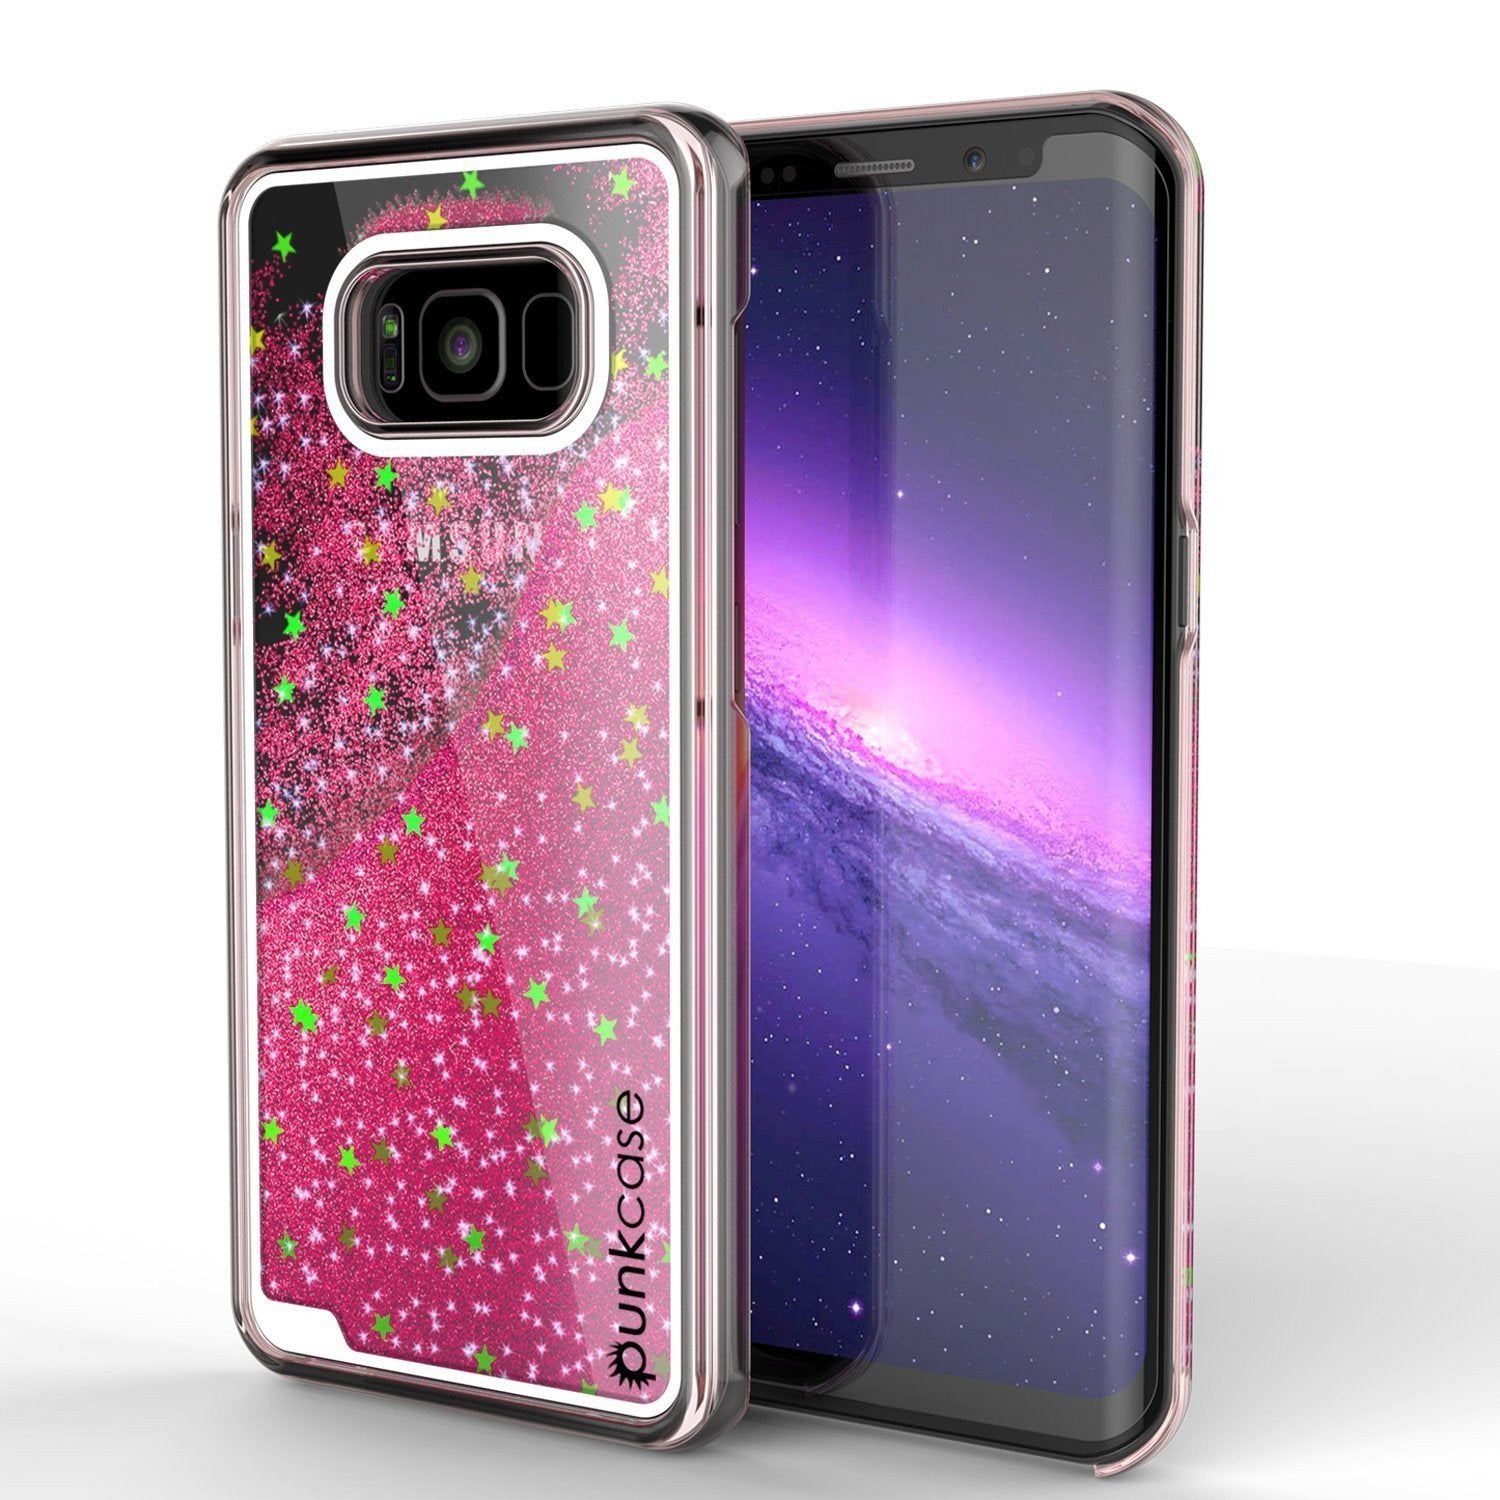 Galaxy S8 Case, Punkcase [Liquid Series] Protective Dual Layer Floating Glitter Cover with lots of Bling & Sparkle + PunkShield Screen Protector for Samsung S8 [Pink]